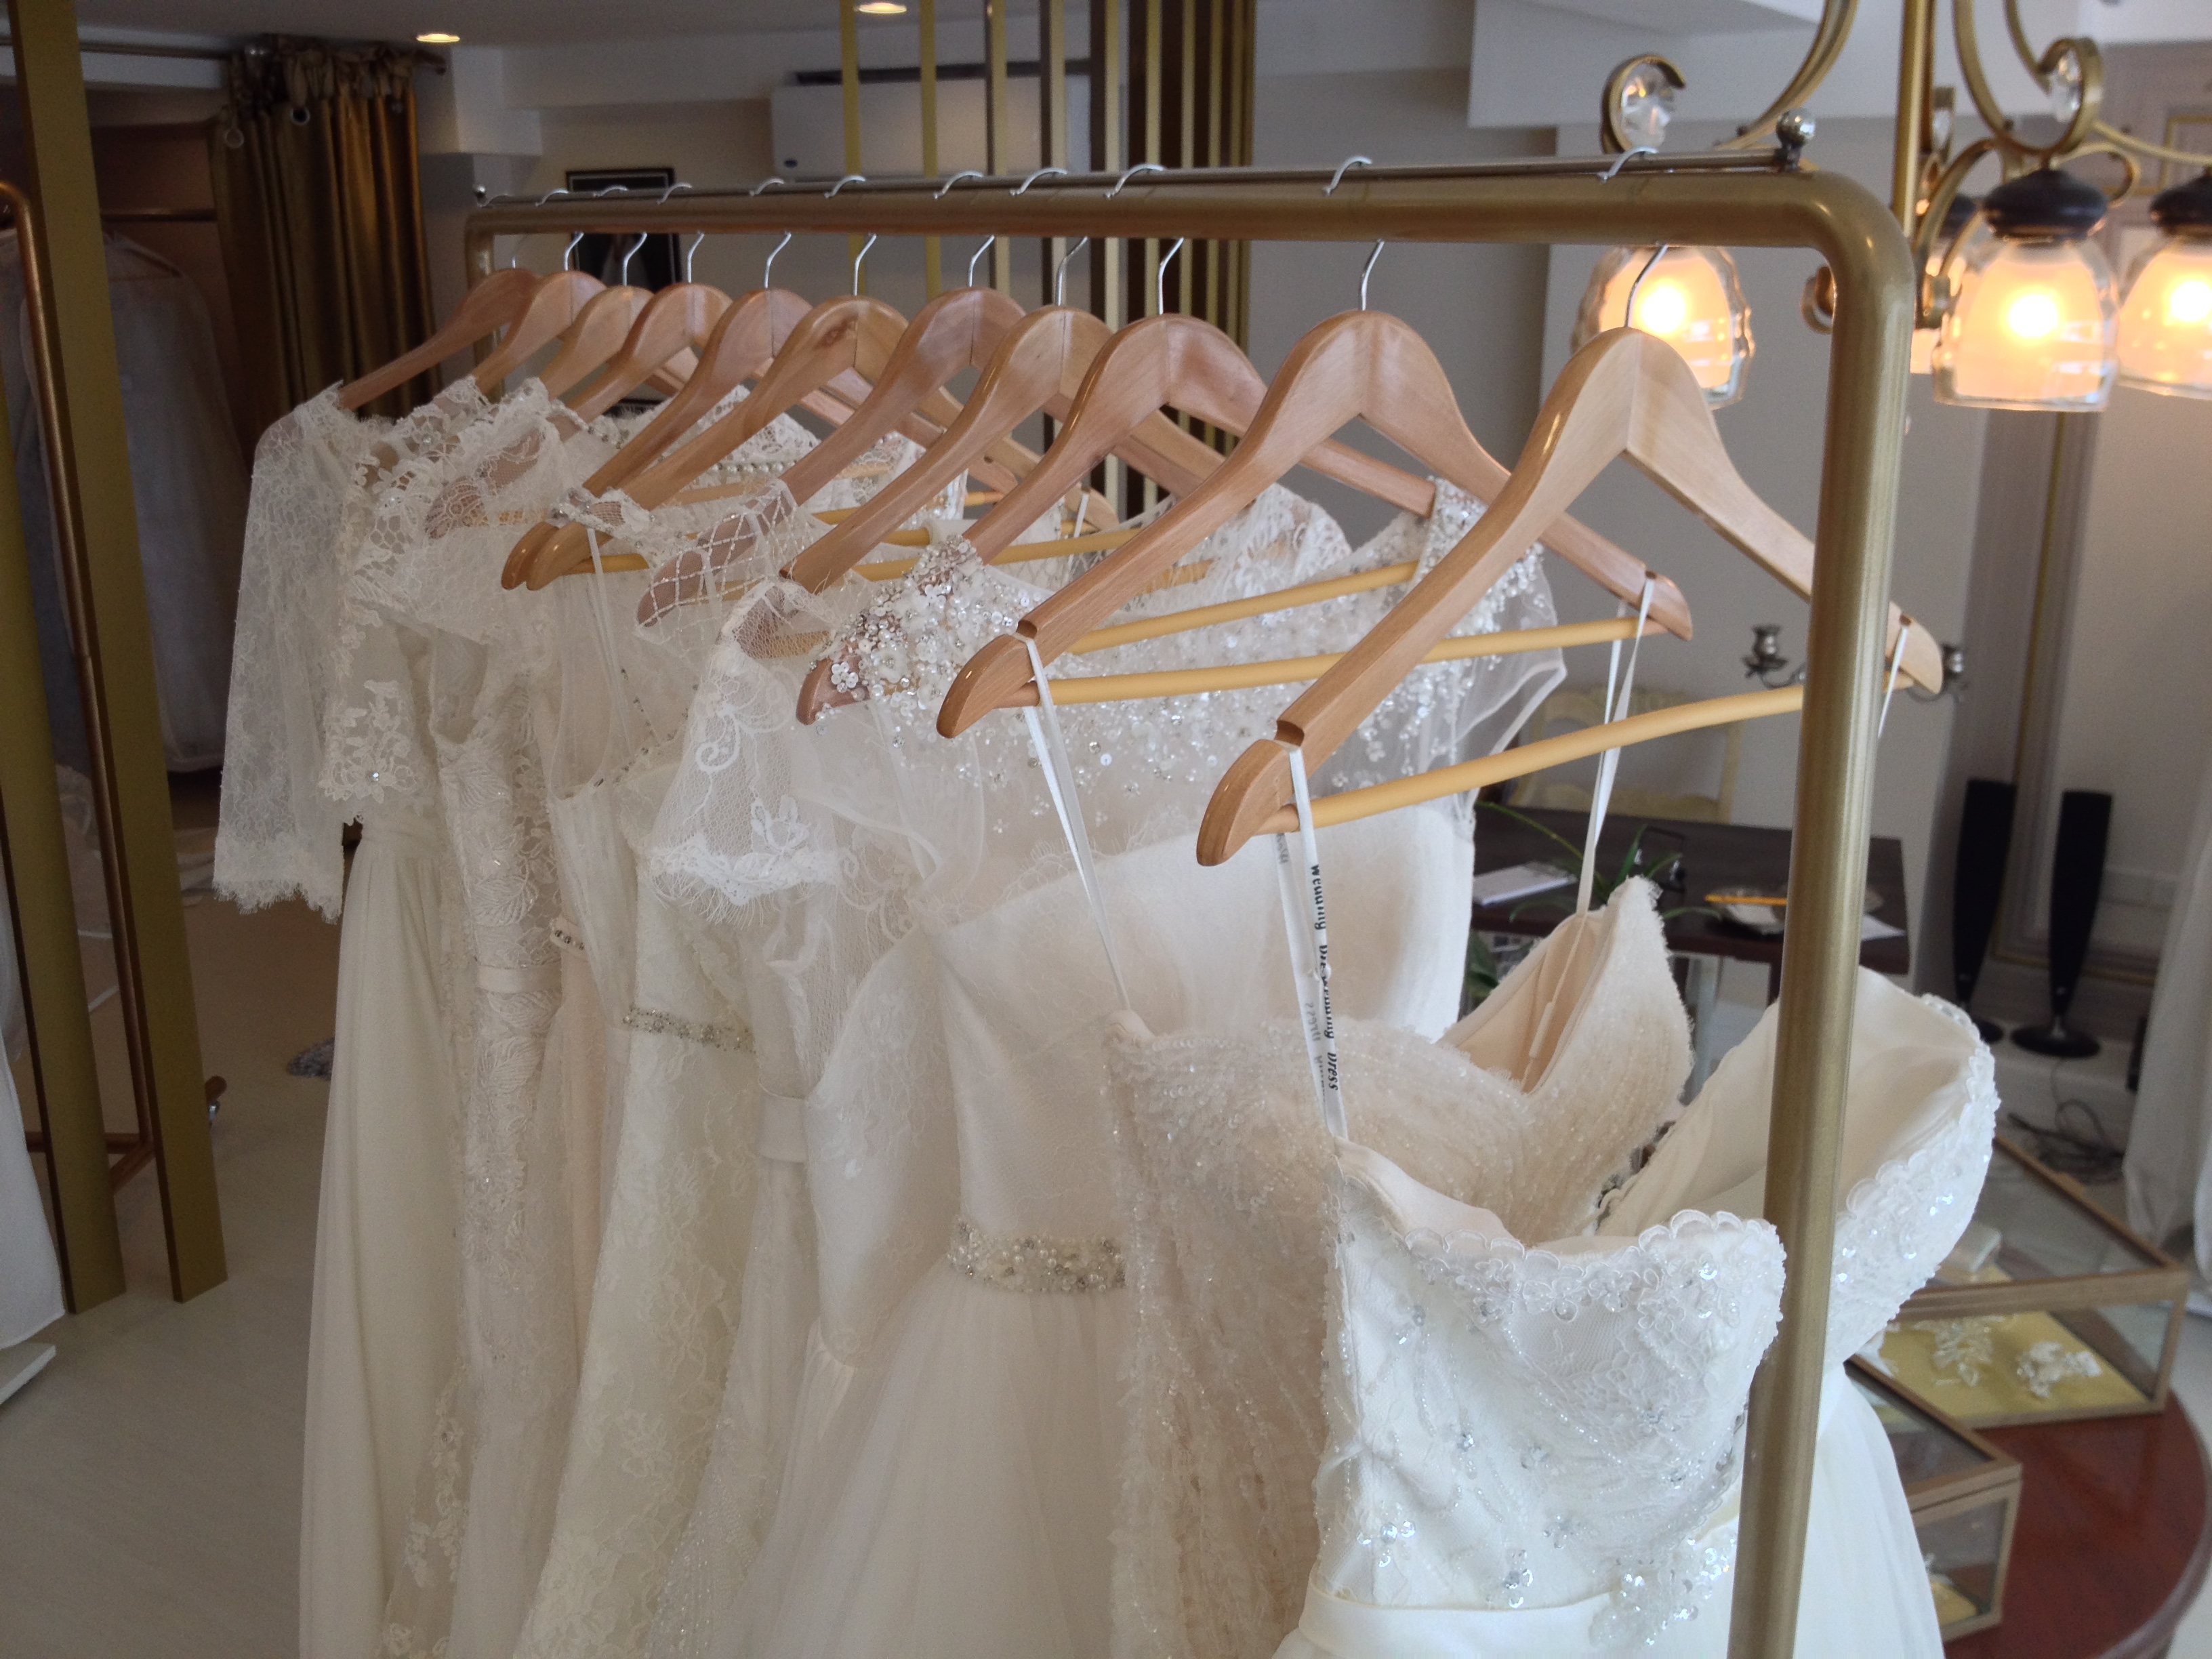 A rack of bridal gowns available for rent at The Bridal Room. 